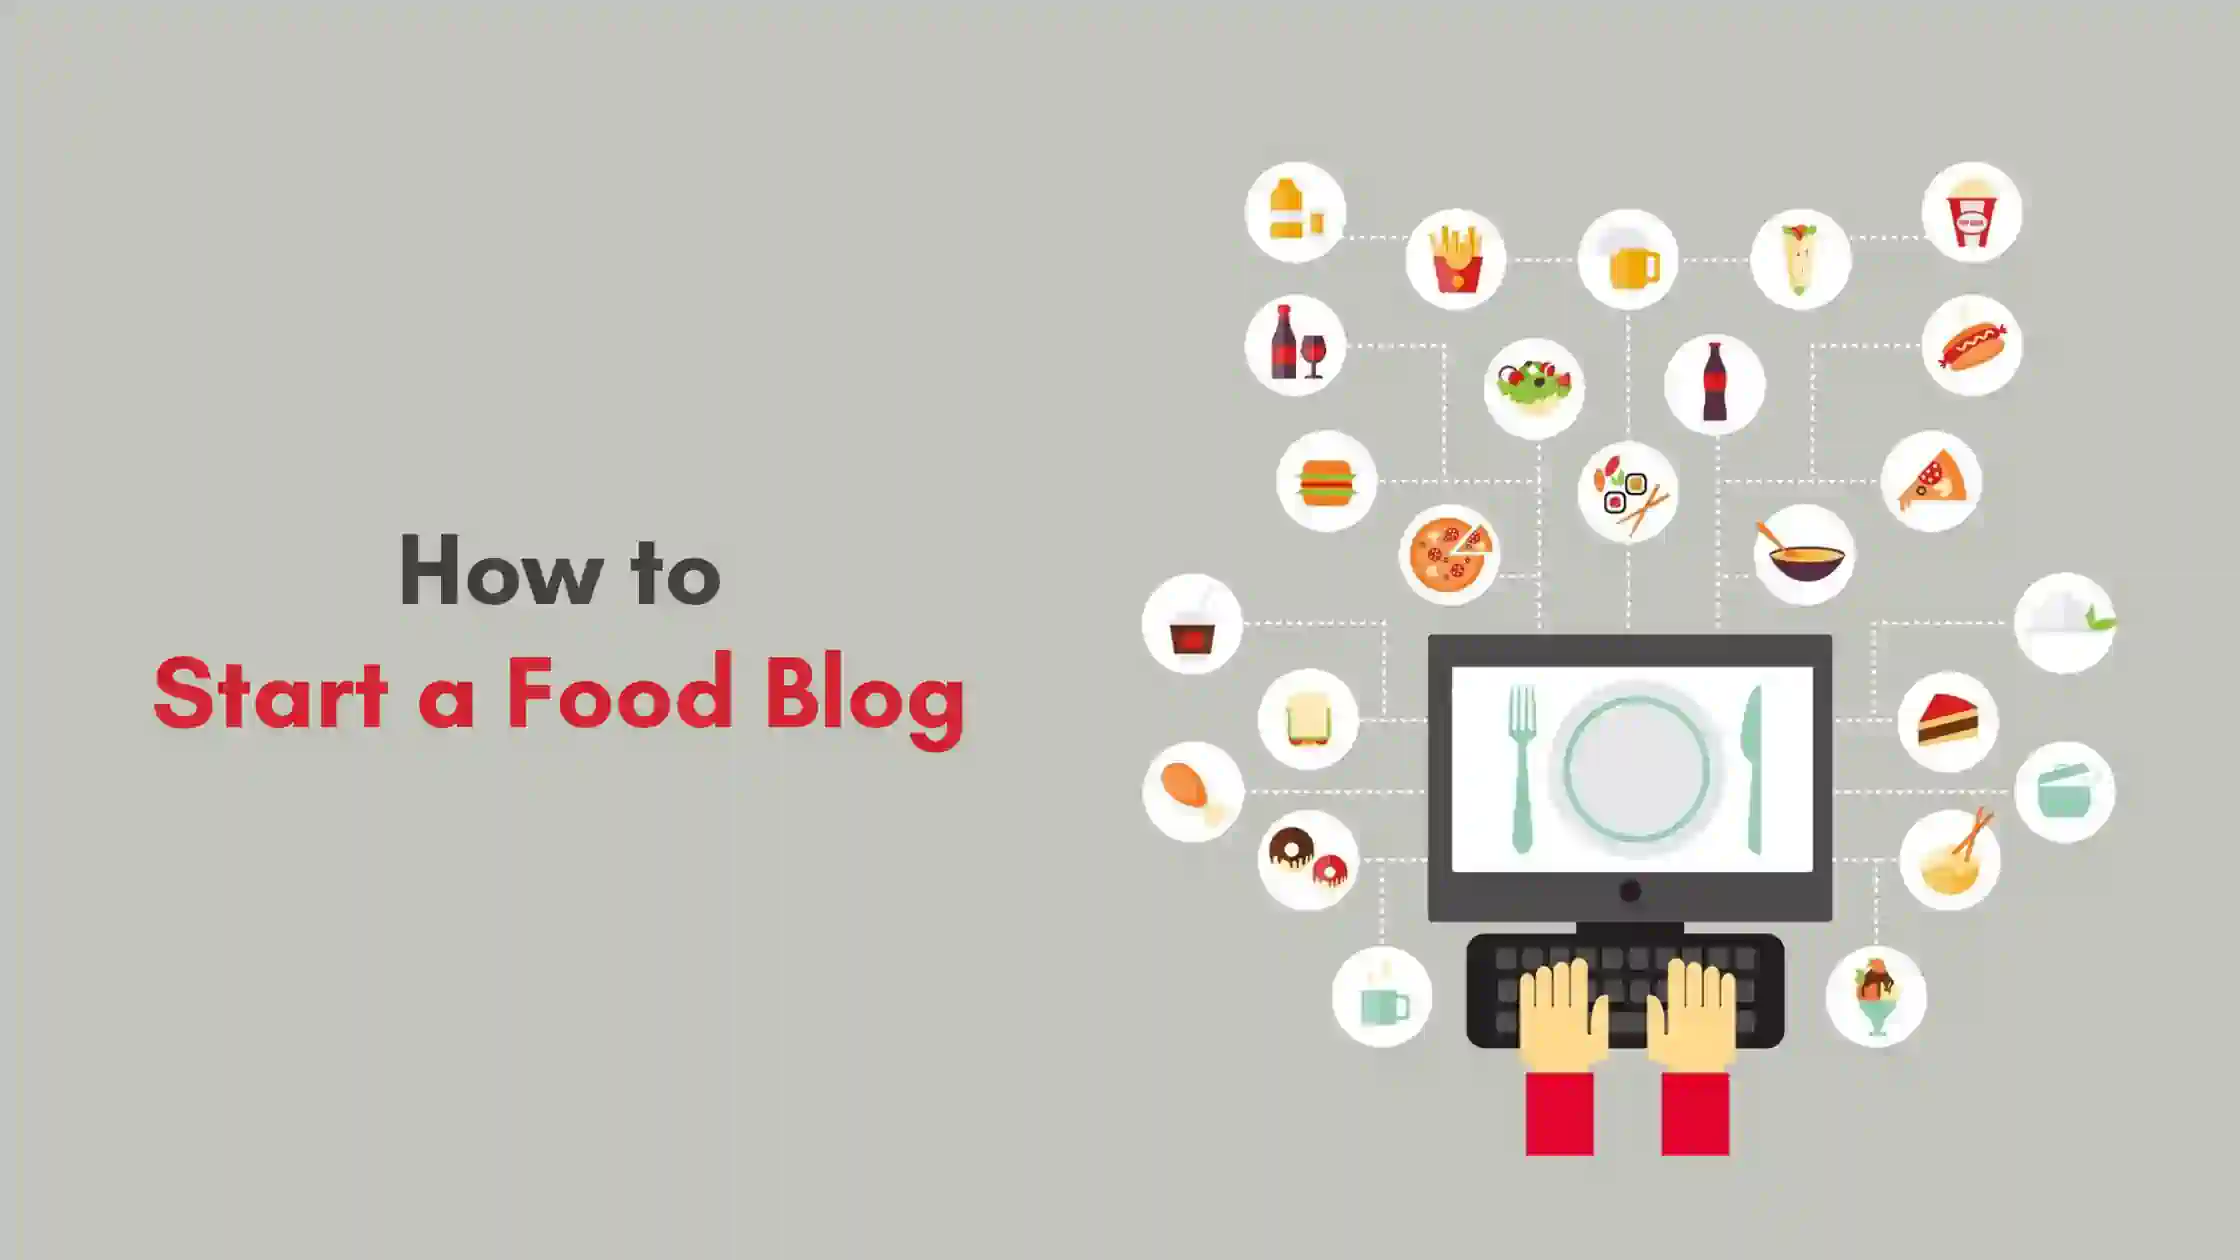 How to Start a Food Blog in 30 Minutes - How to Start a Food Blog [Beginner Startup Guide]